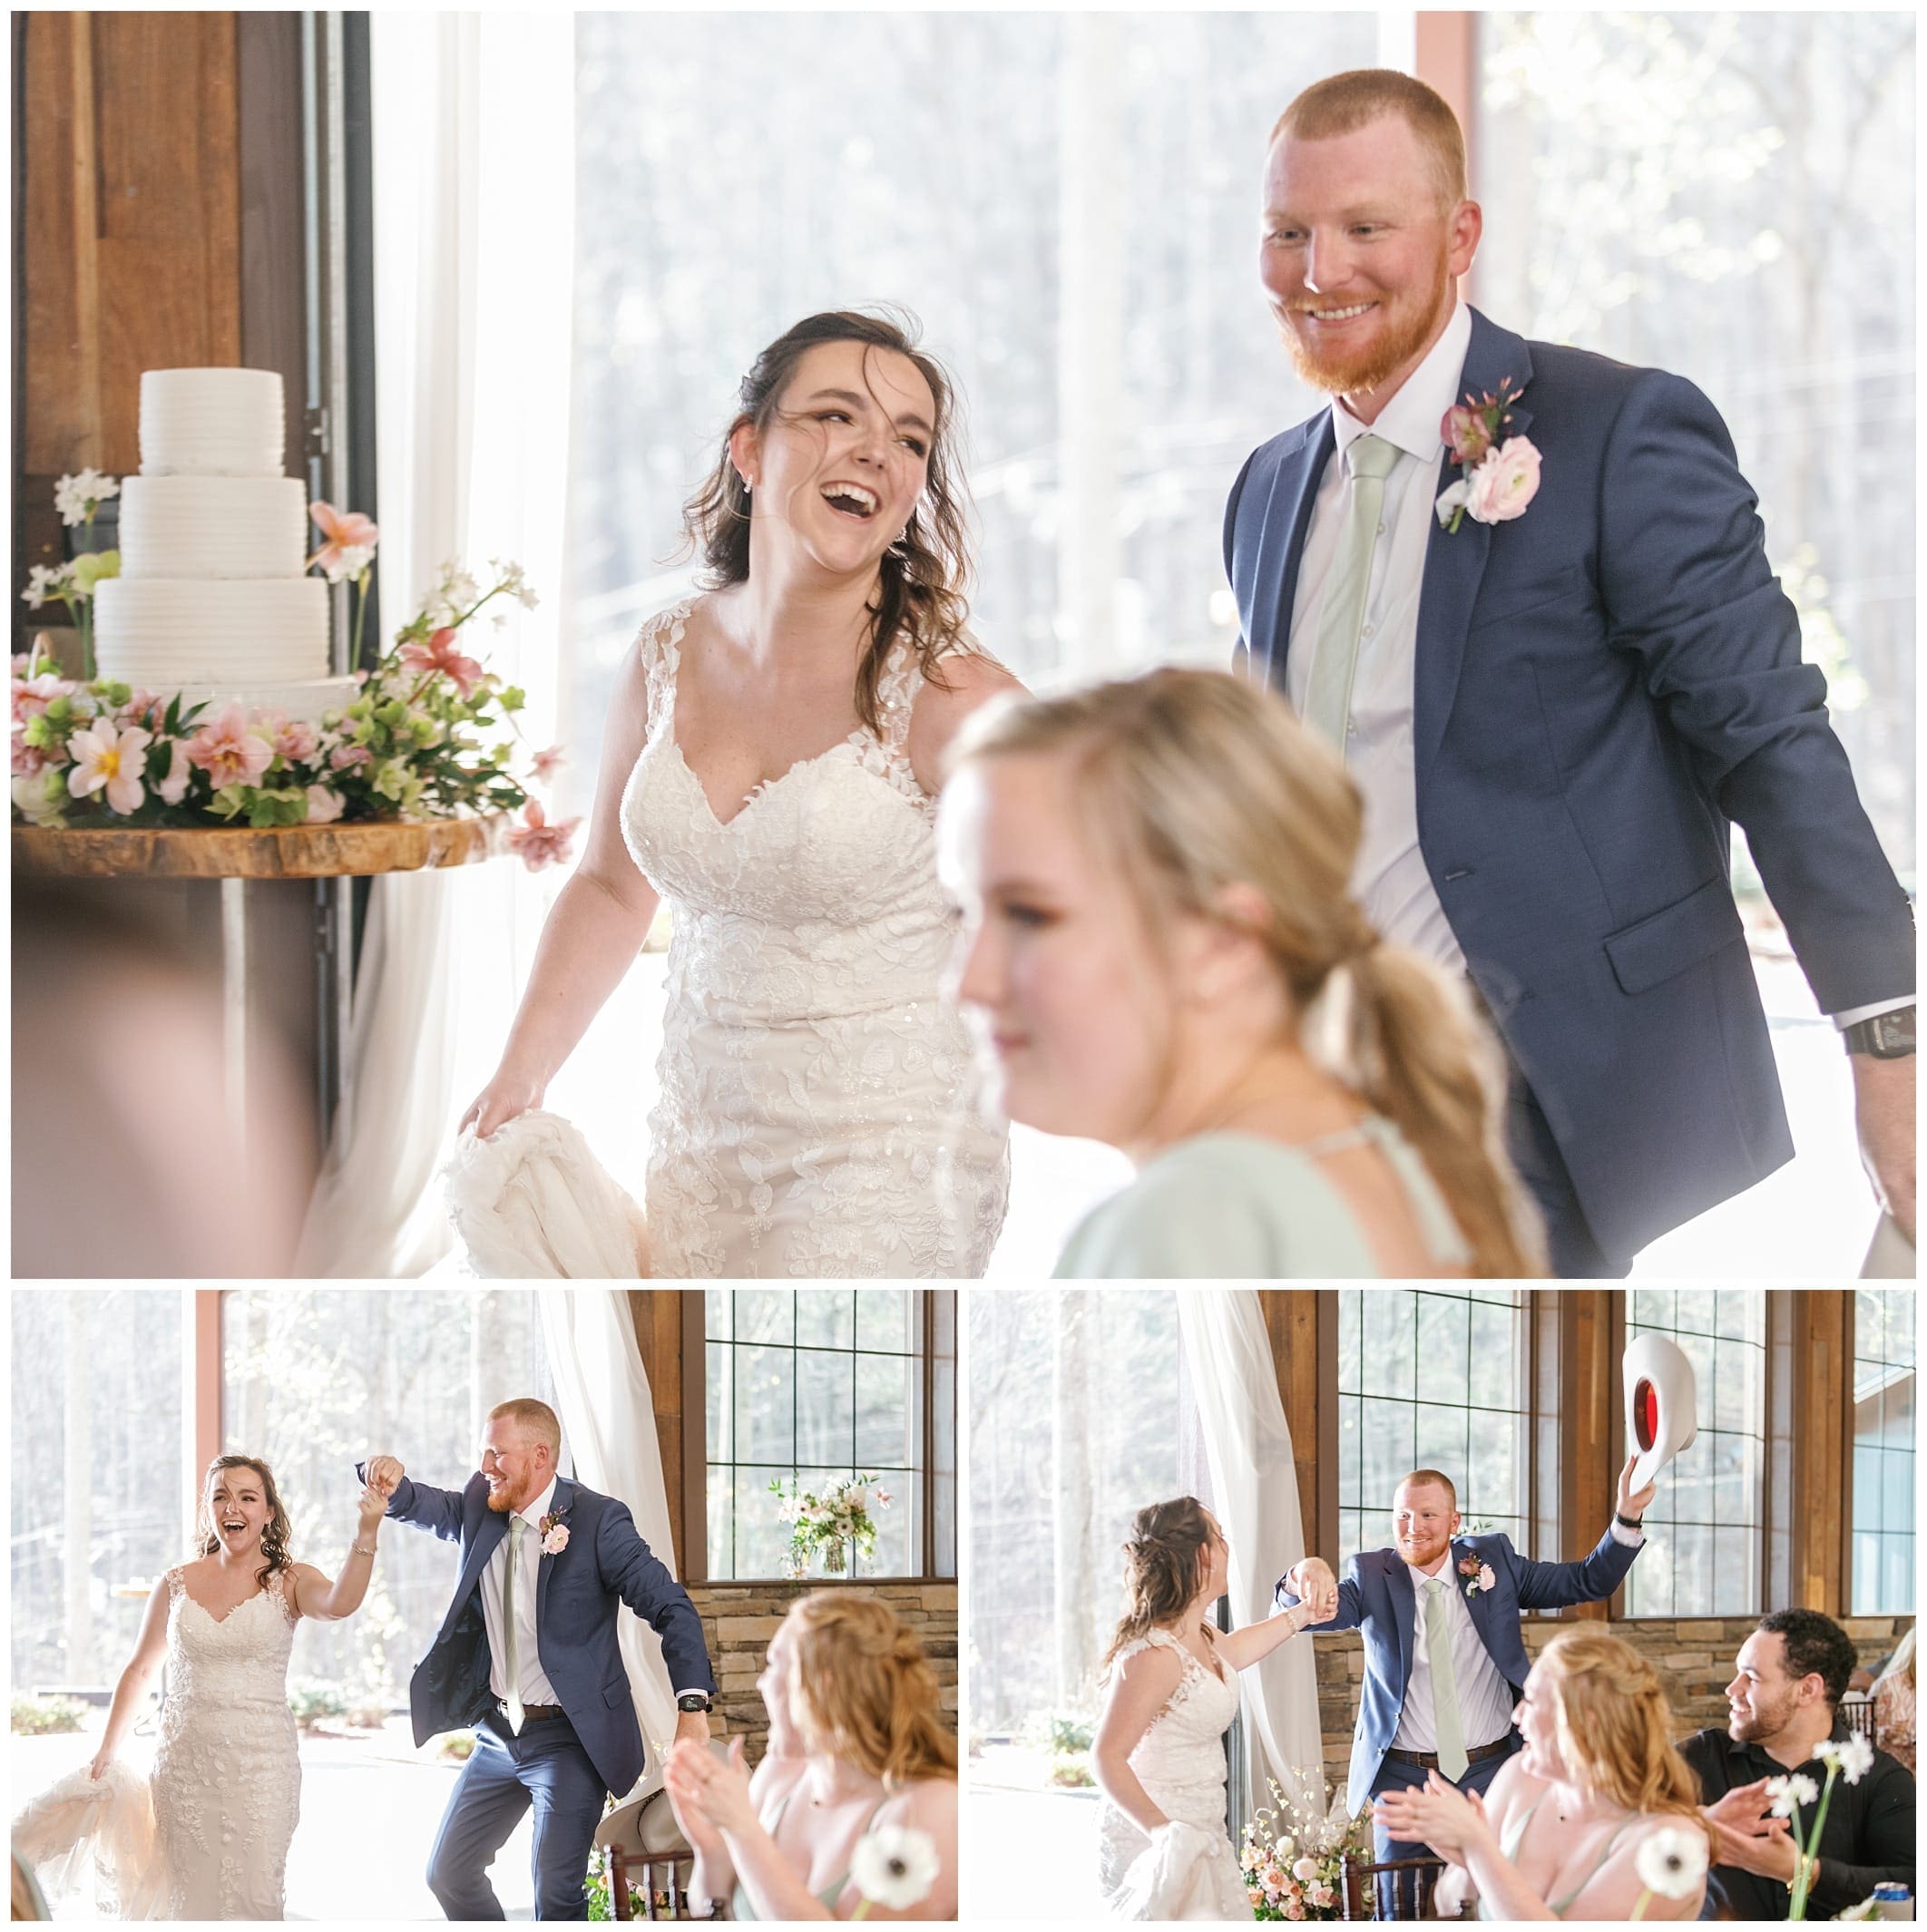 Joyful spring wedding at parker mill - bride and groom make entrance into the reception while laughing and having fun